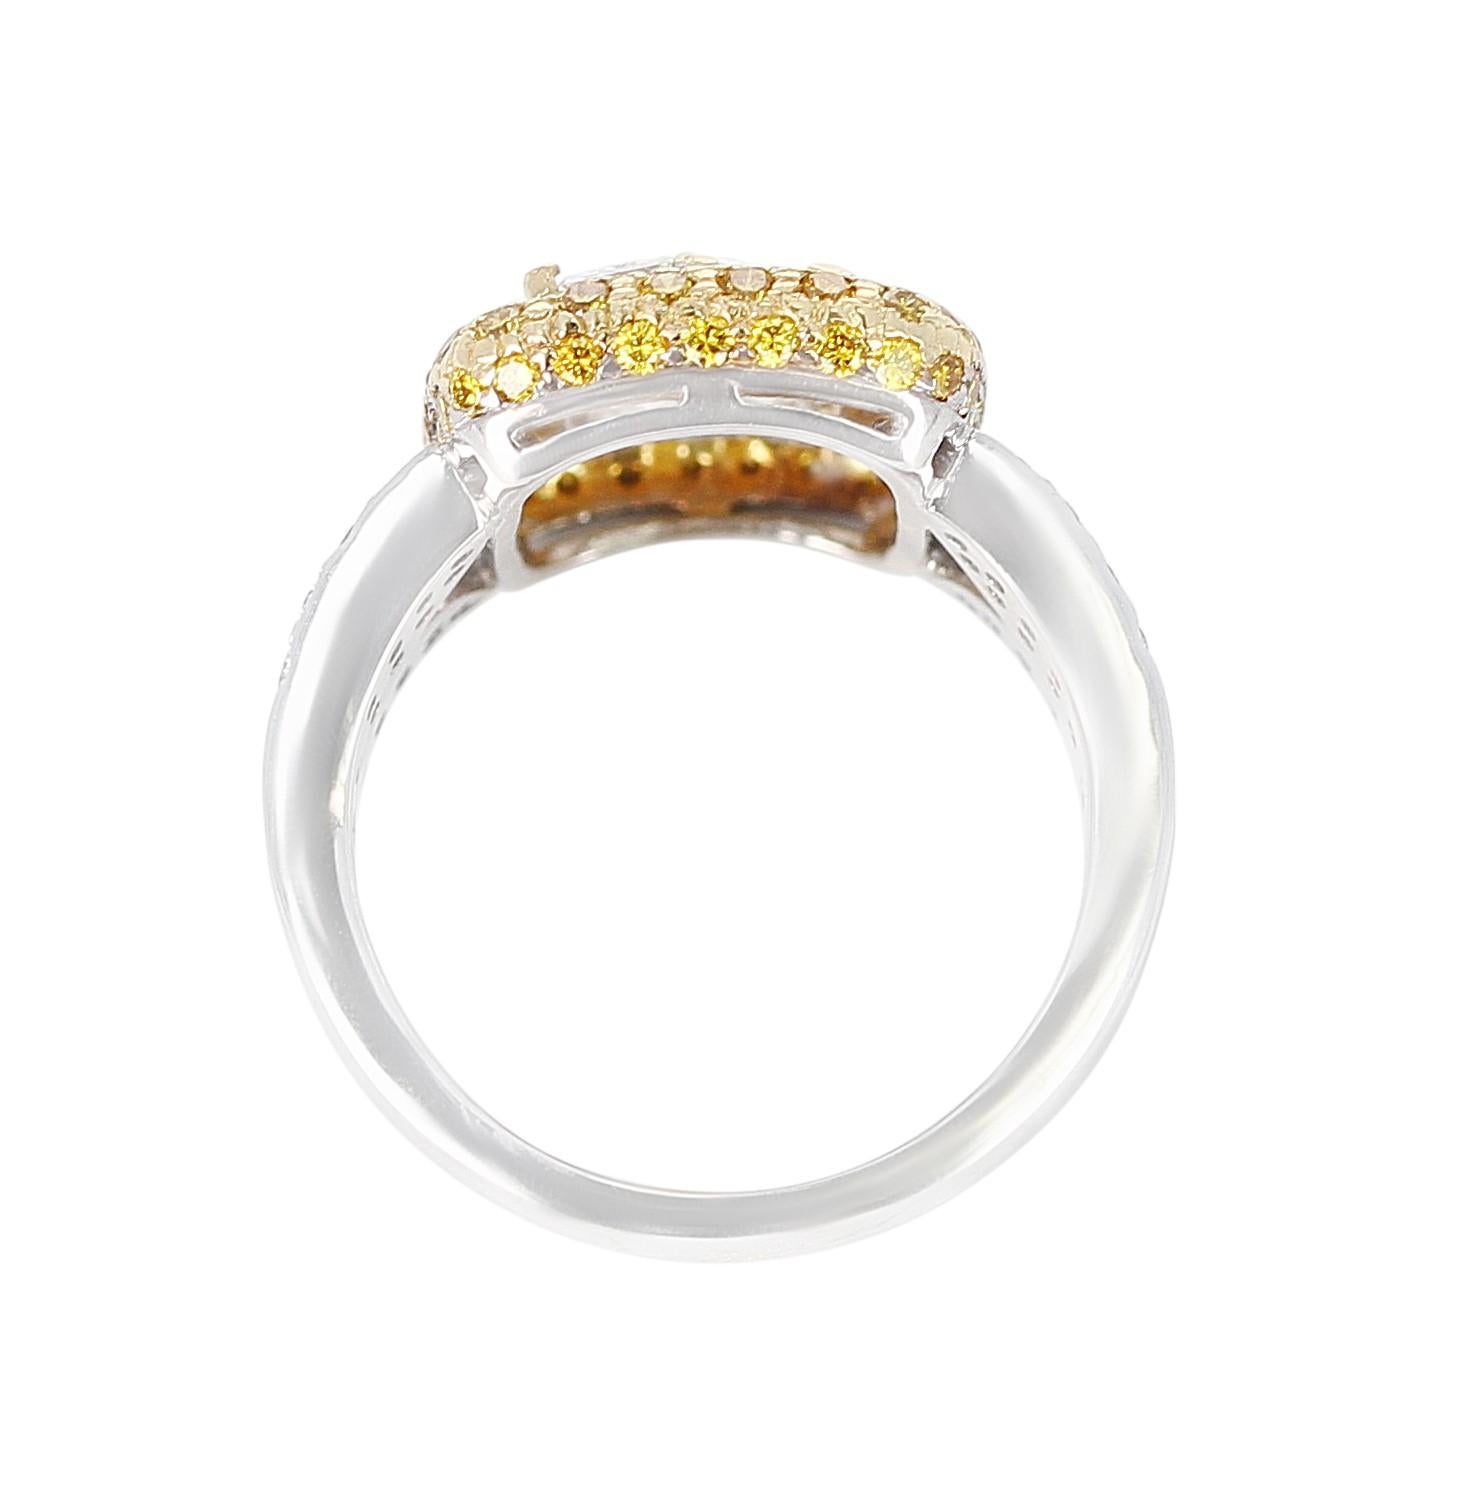 Women's or Men's Emerald-Cut Diamond Engagement Ring with Pave Yellow Diamonds and White Diamonds For Sale